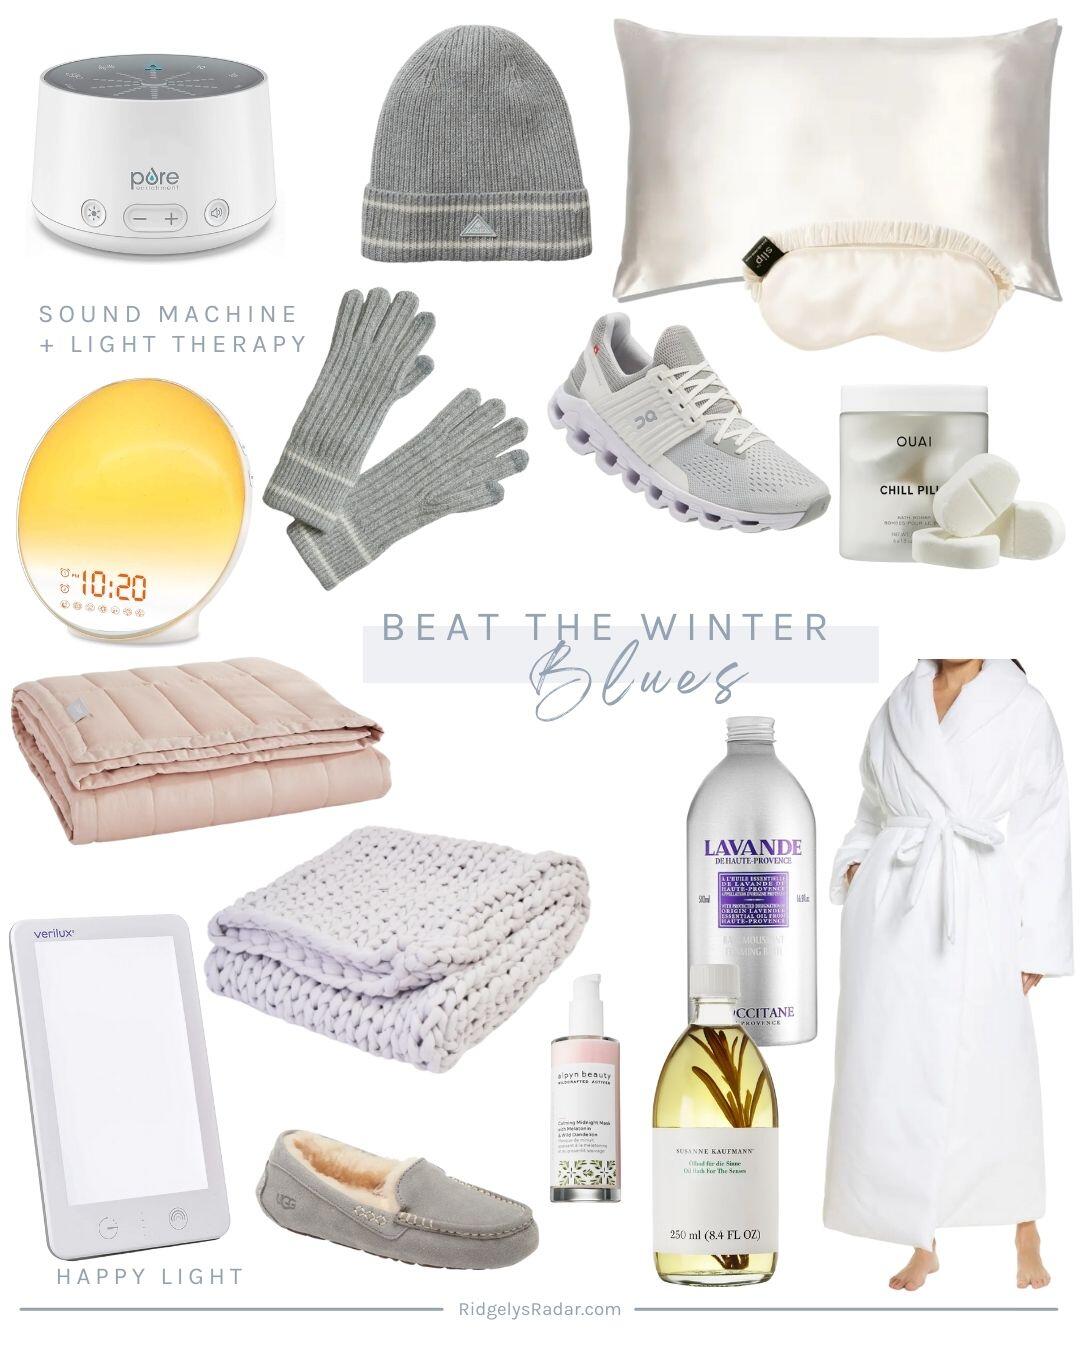 Are you feeling the effects of a long dark Winter? Here are 8 things you can do to beat the winter blues and feel better!